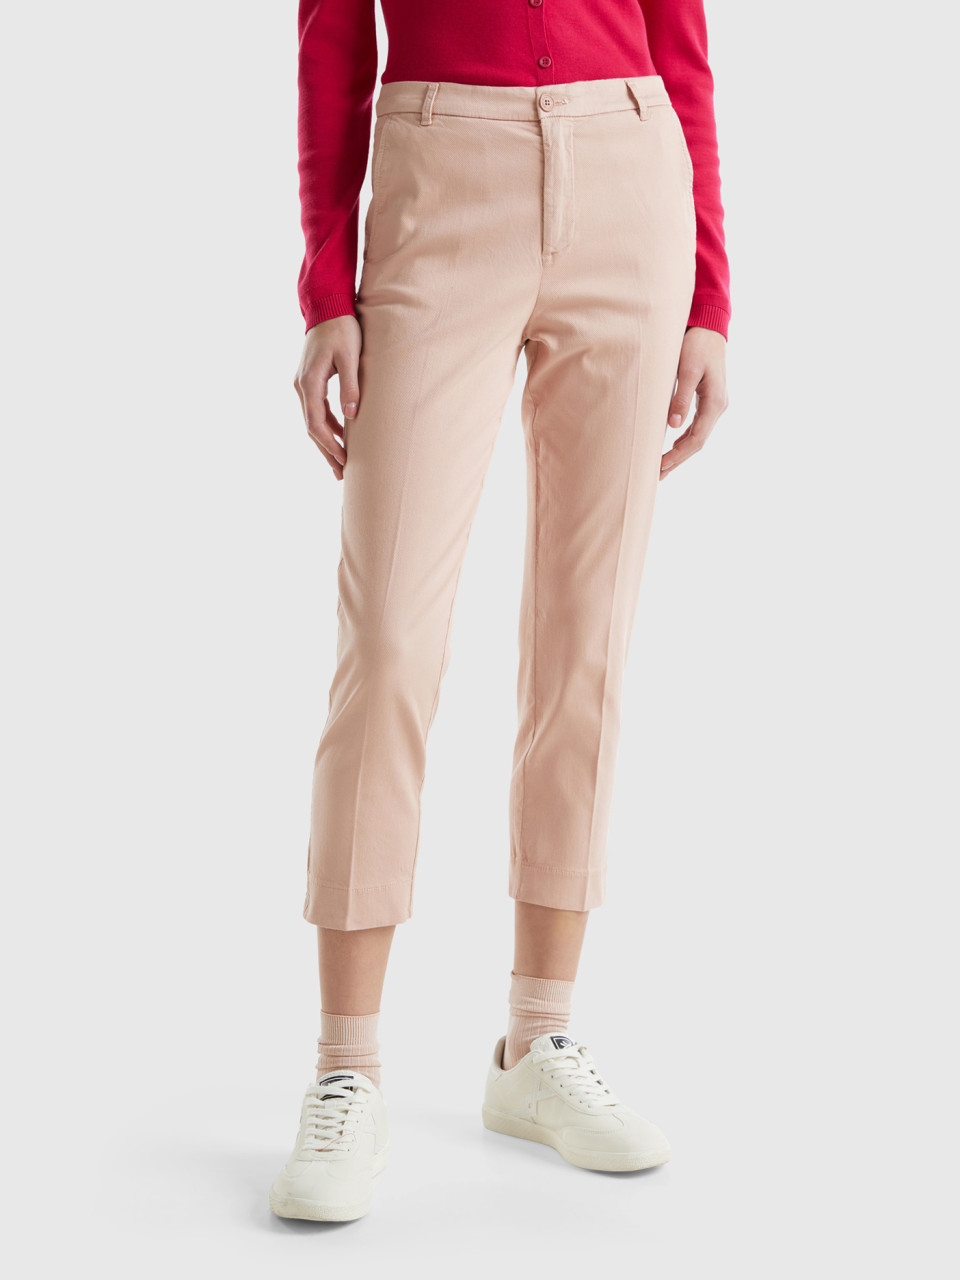 Benetton, Cropped Chinos In Stretch Cotton, Soft Pink, Women